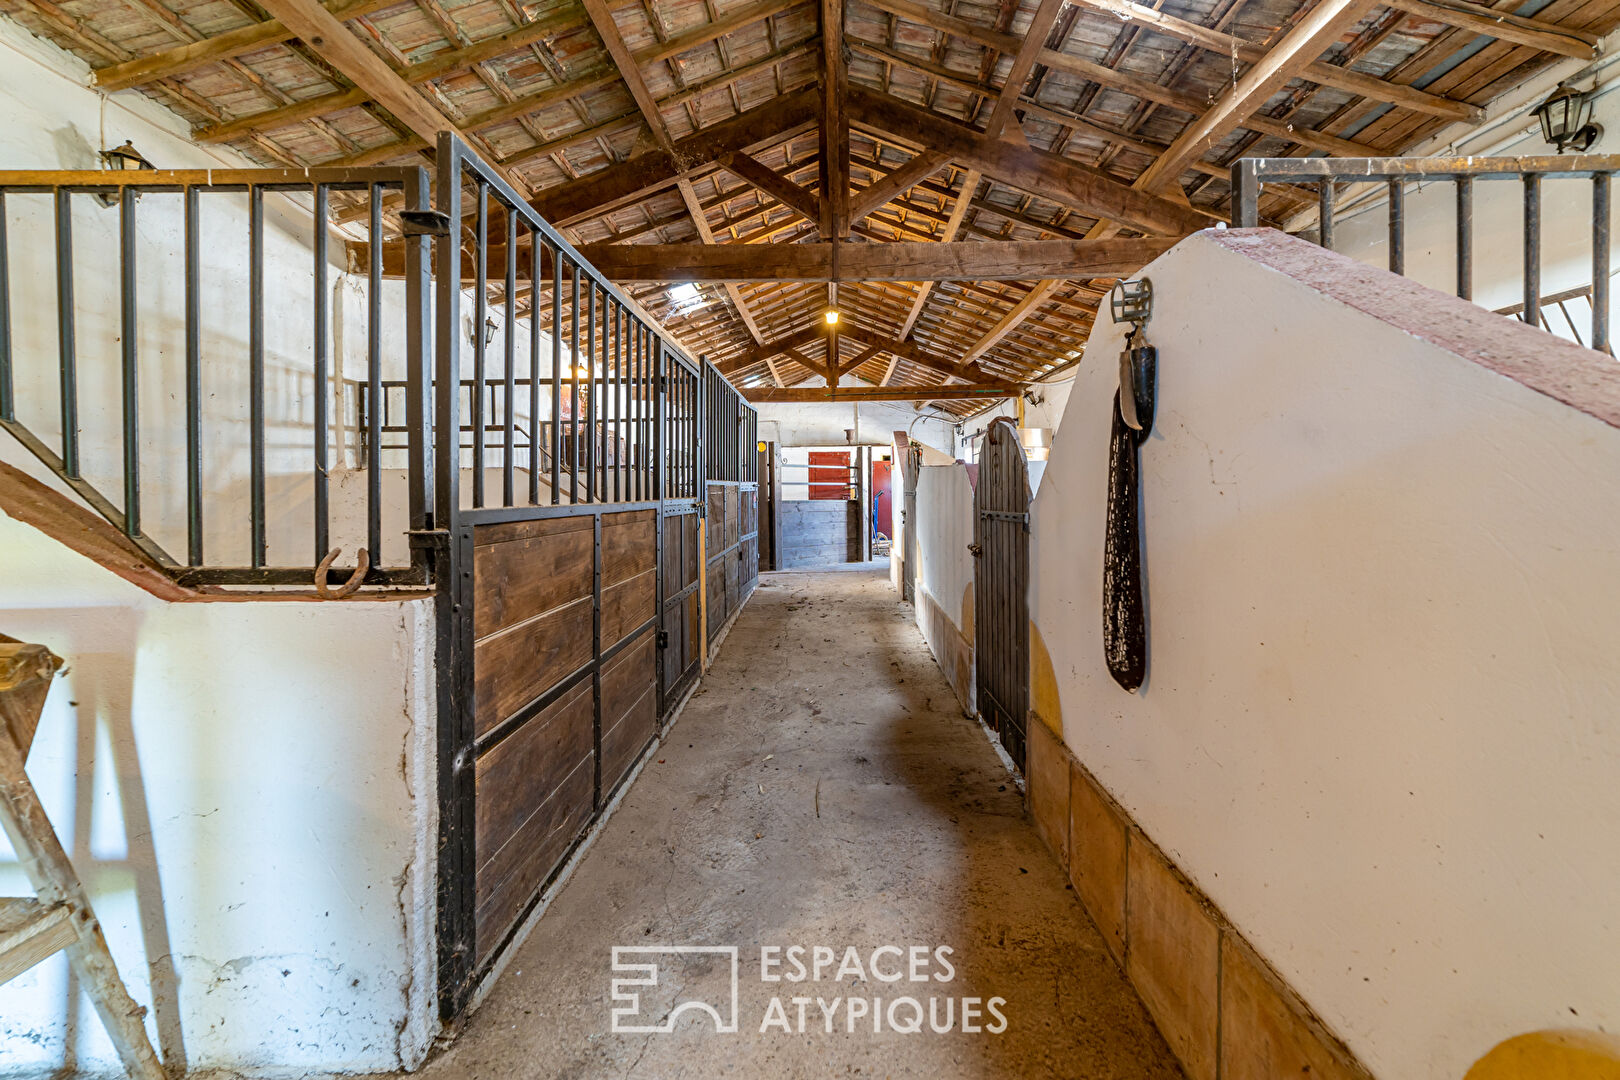 “The hacienda of 8 houses in the Camargue”